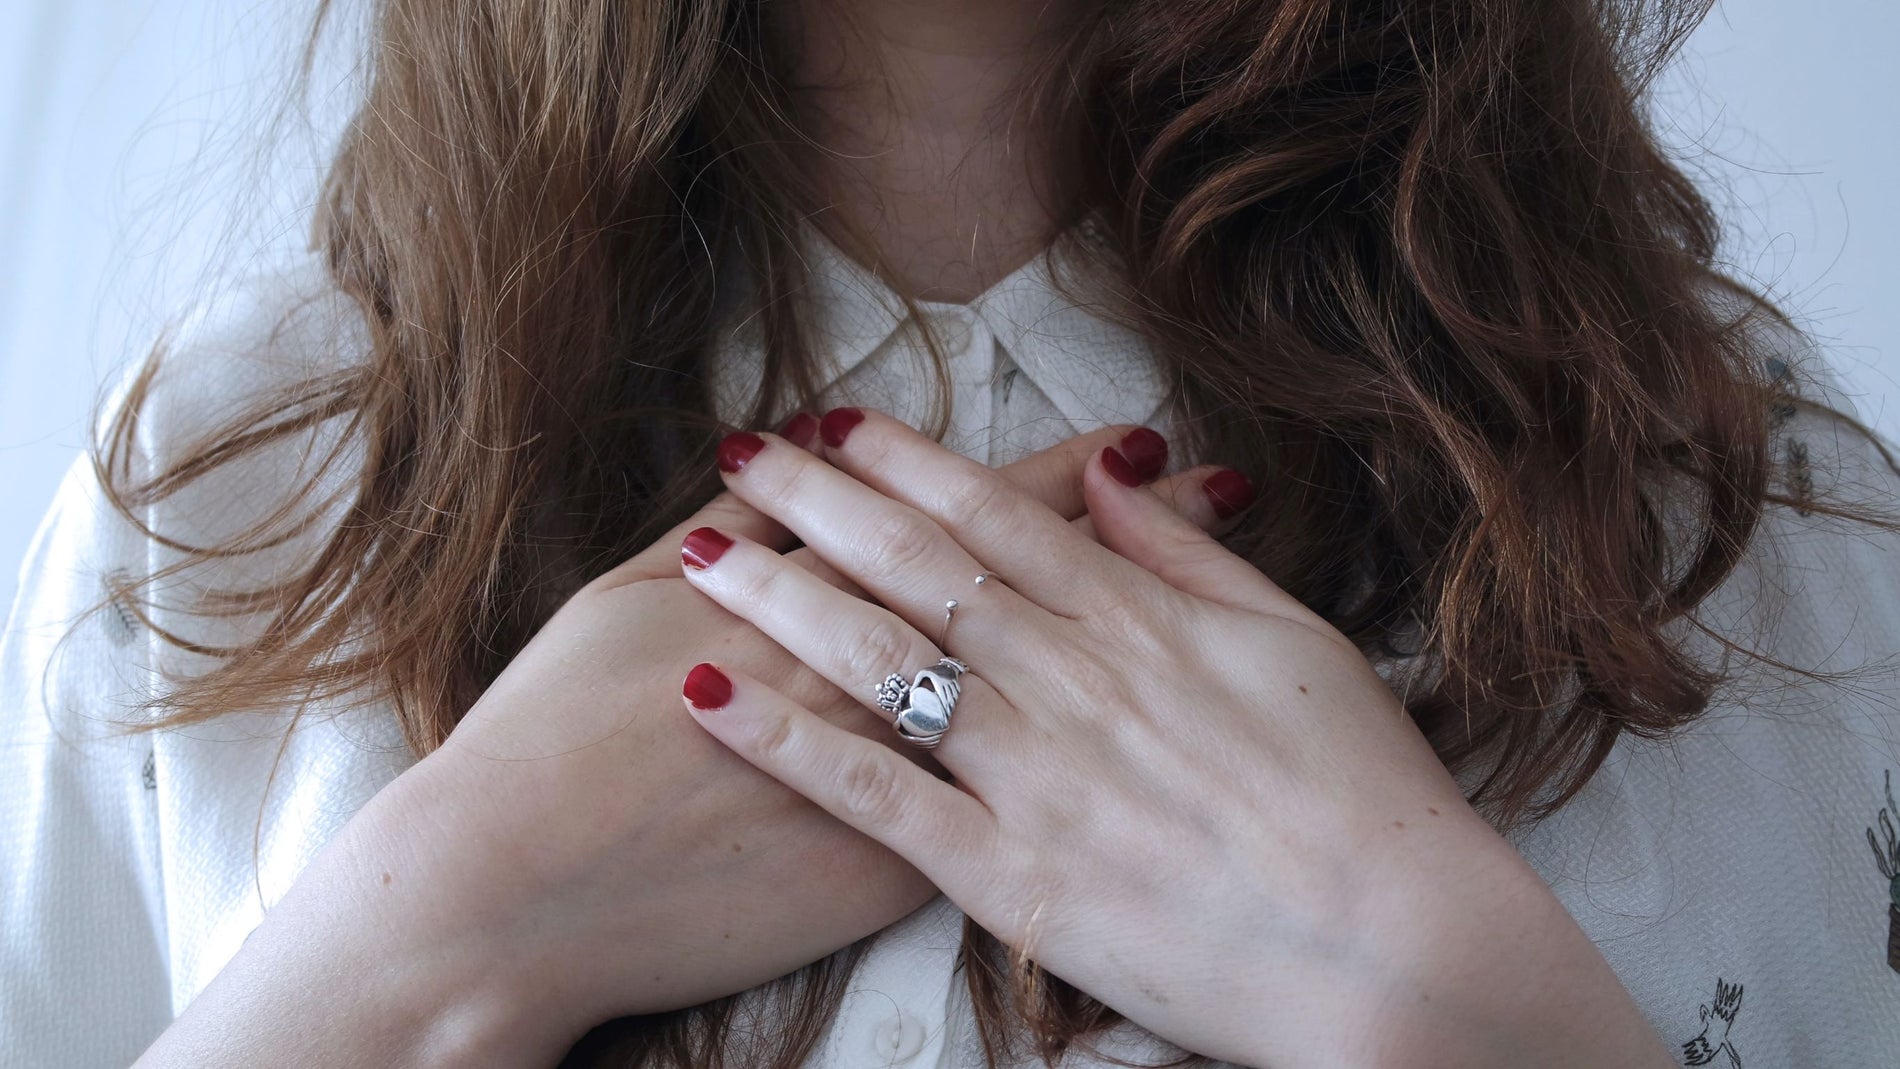 The significance and symbolism of the Claddagh ring